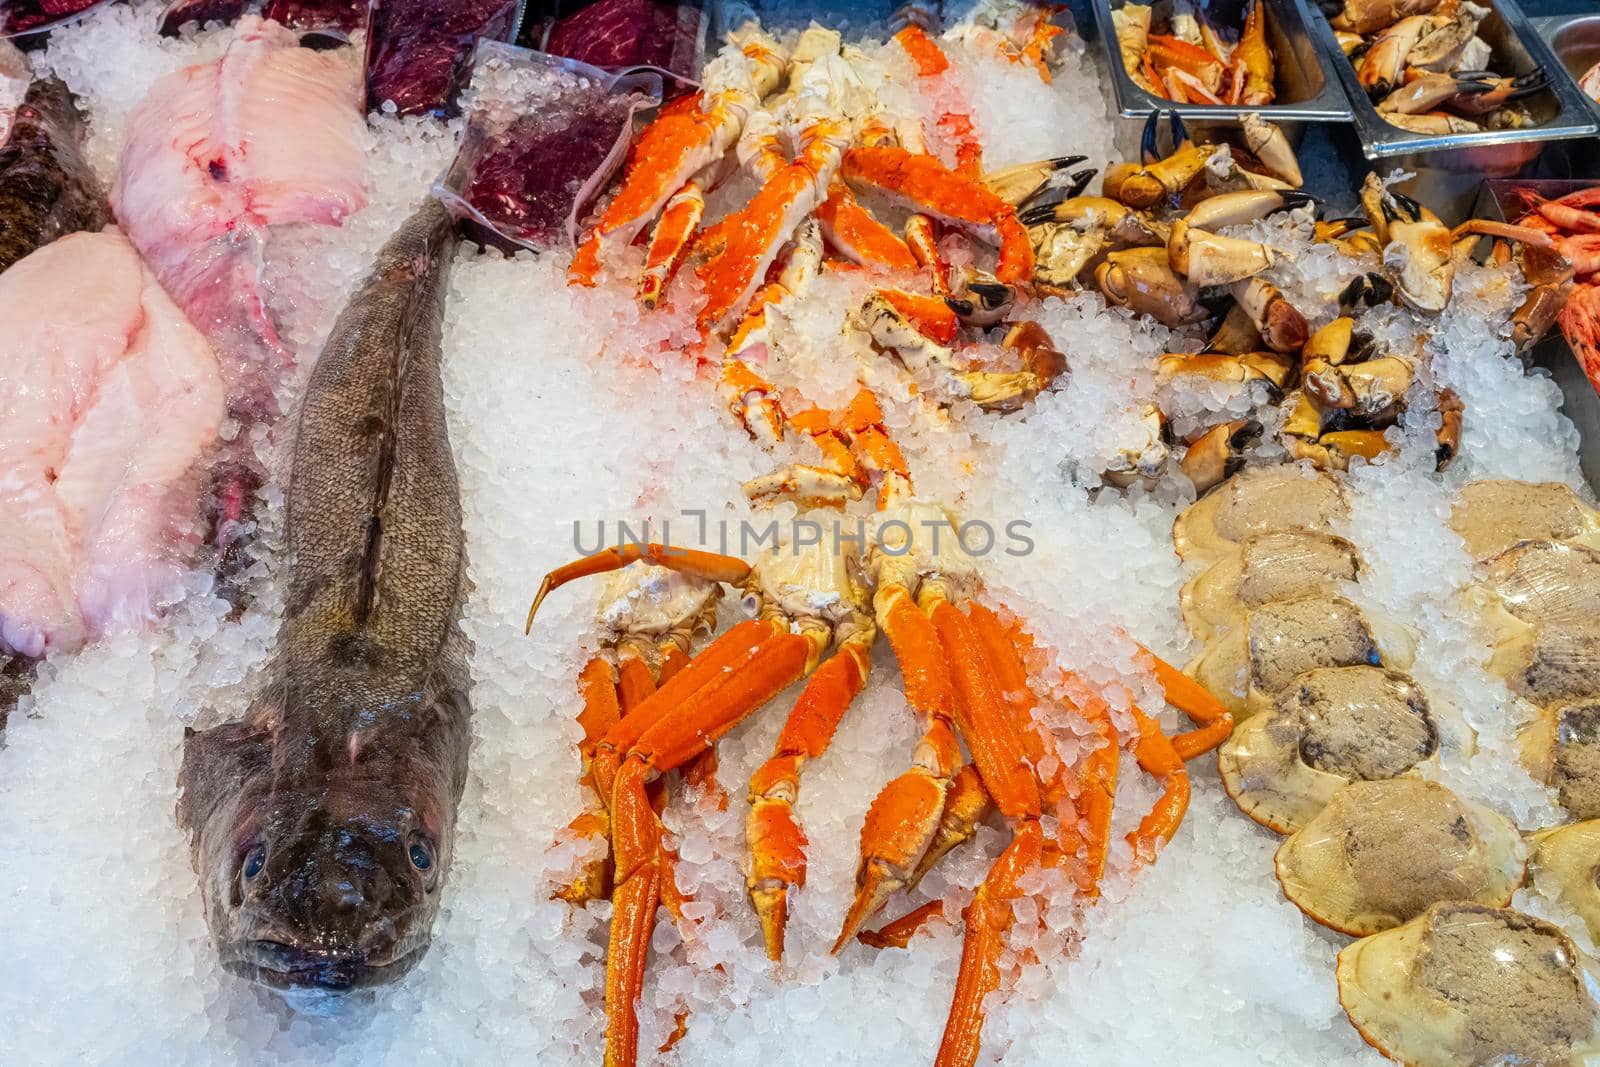 Fish, crustaceans and seafood for sale at a market in Bergen, Norway